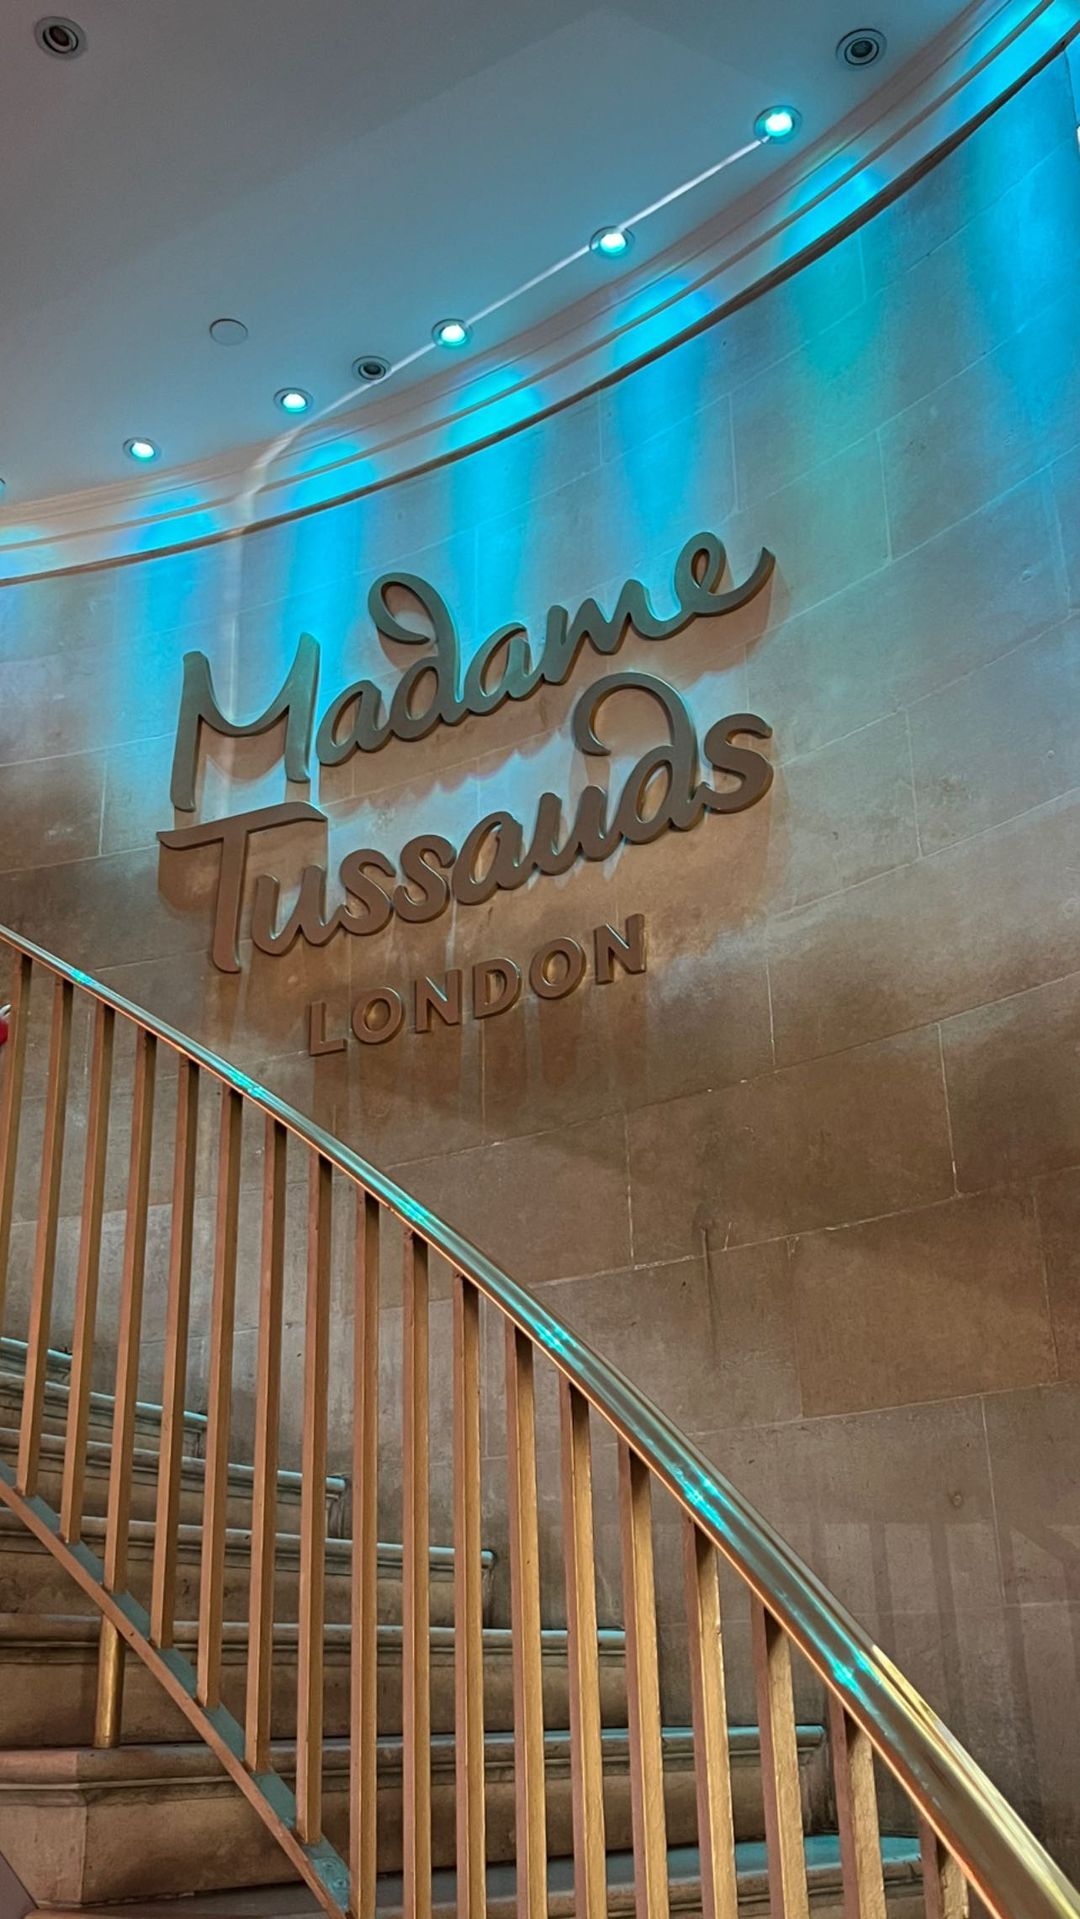 A picture from inside Madame Tussauds in London